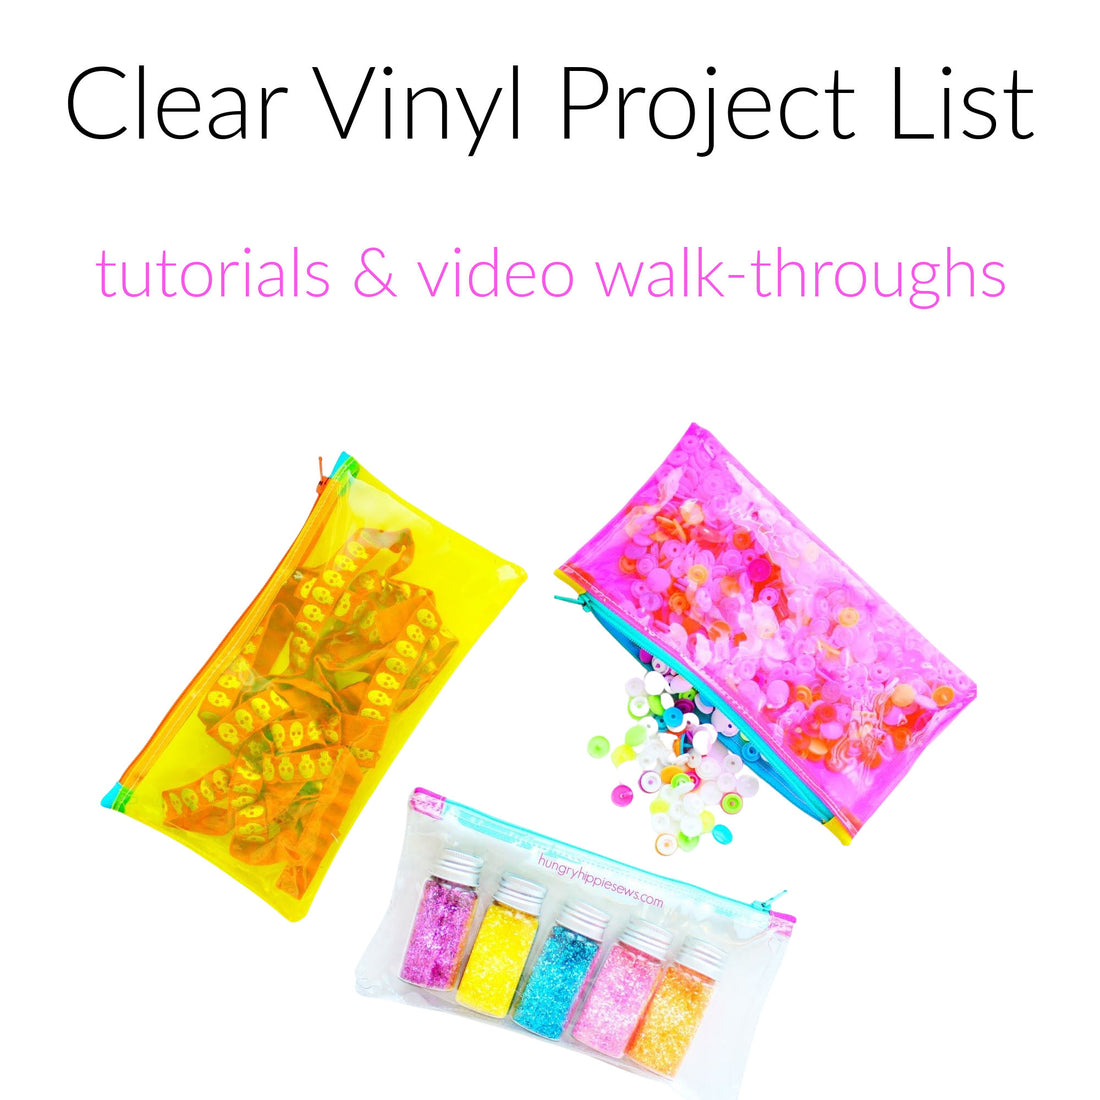 Clear Vinyl Project List